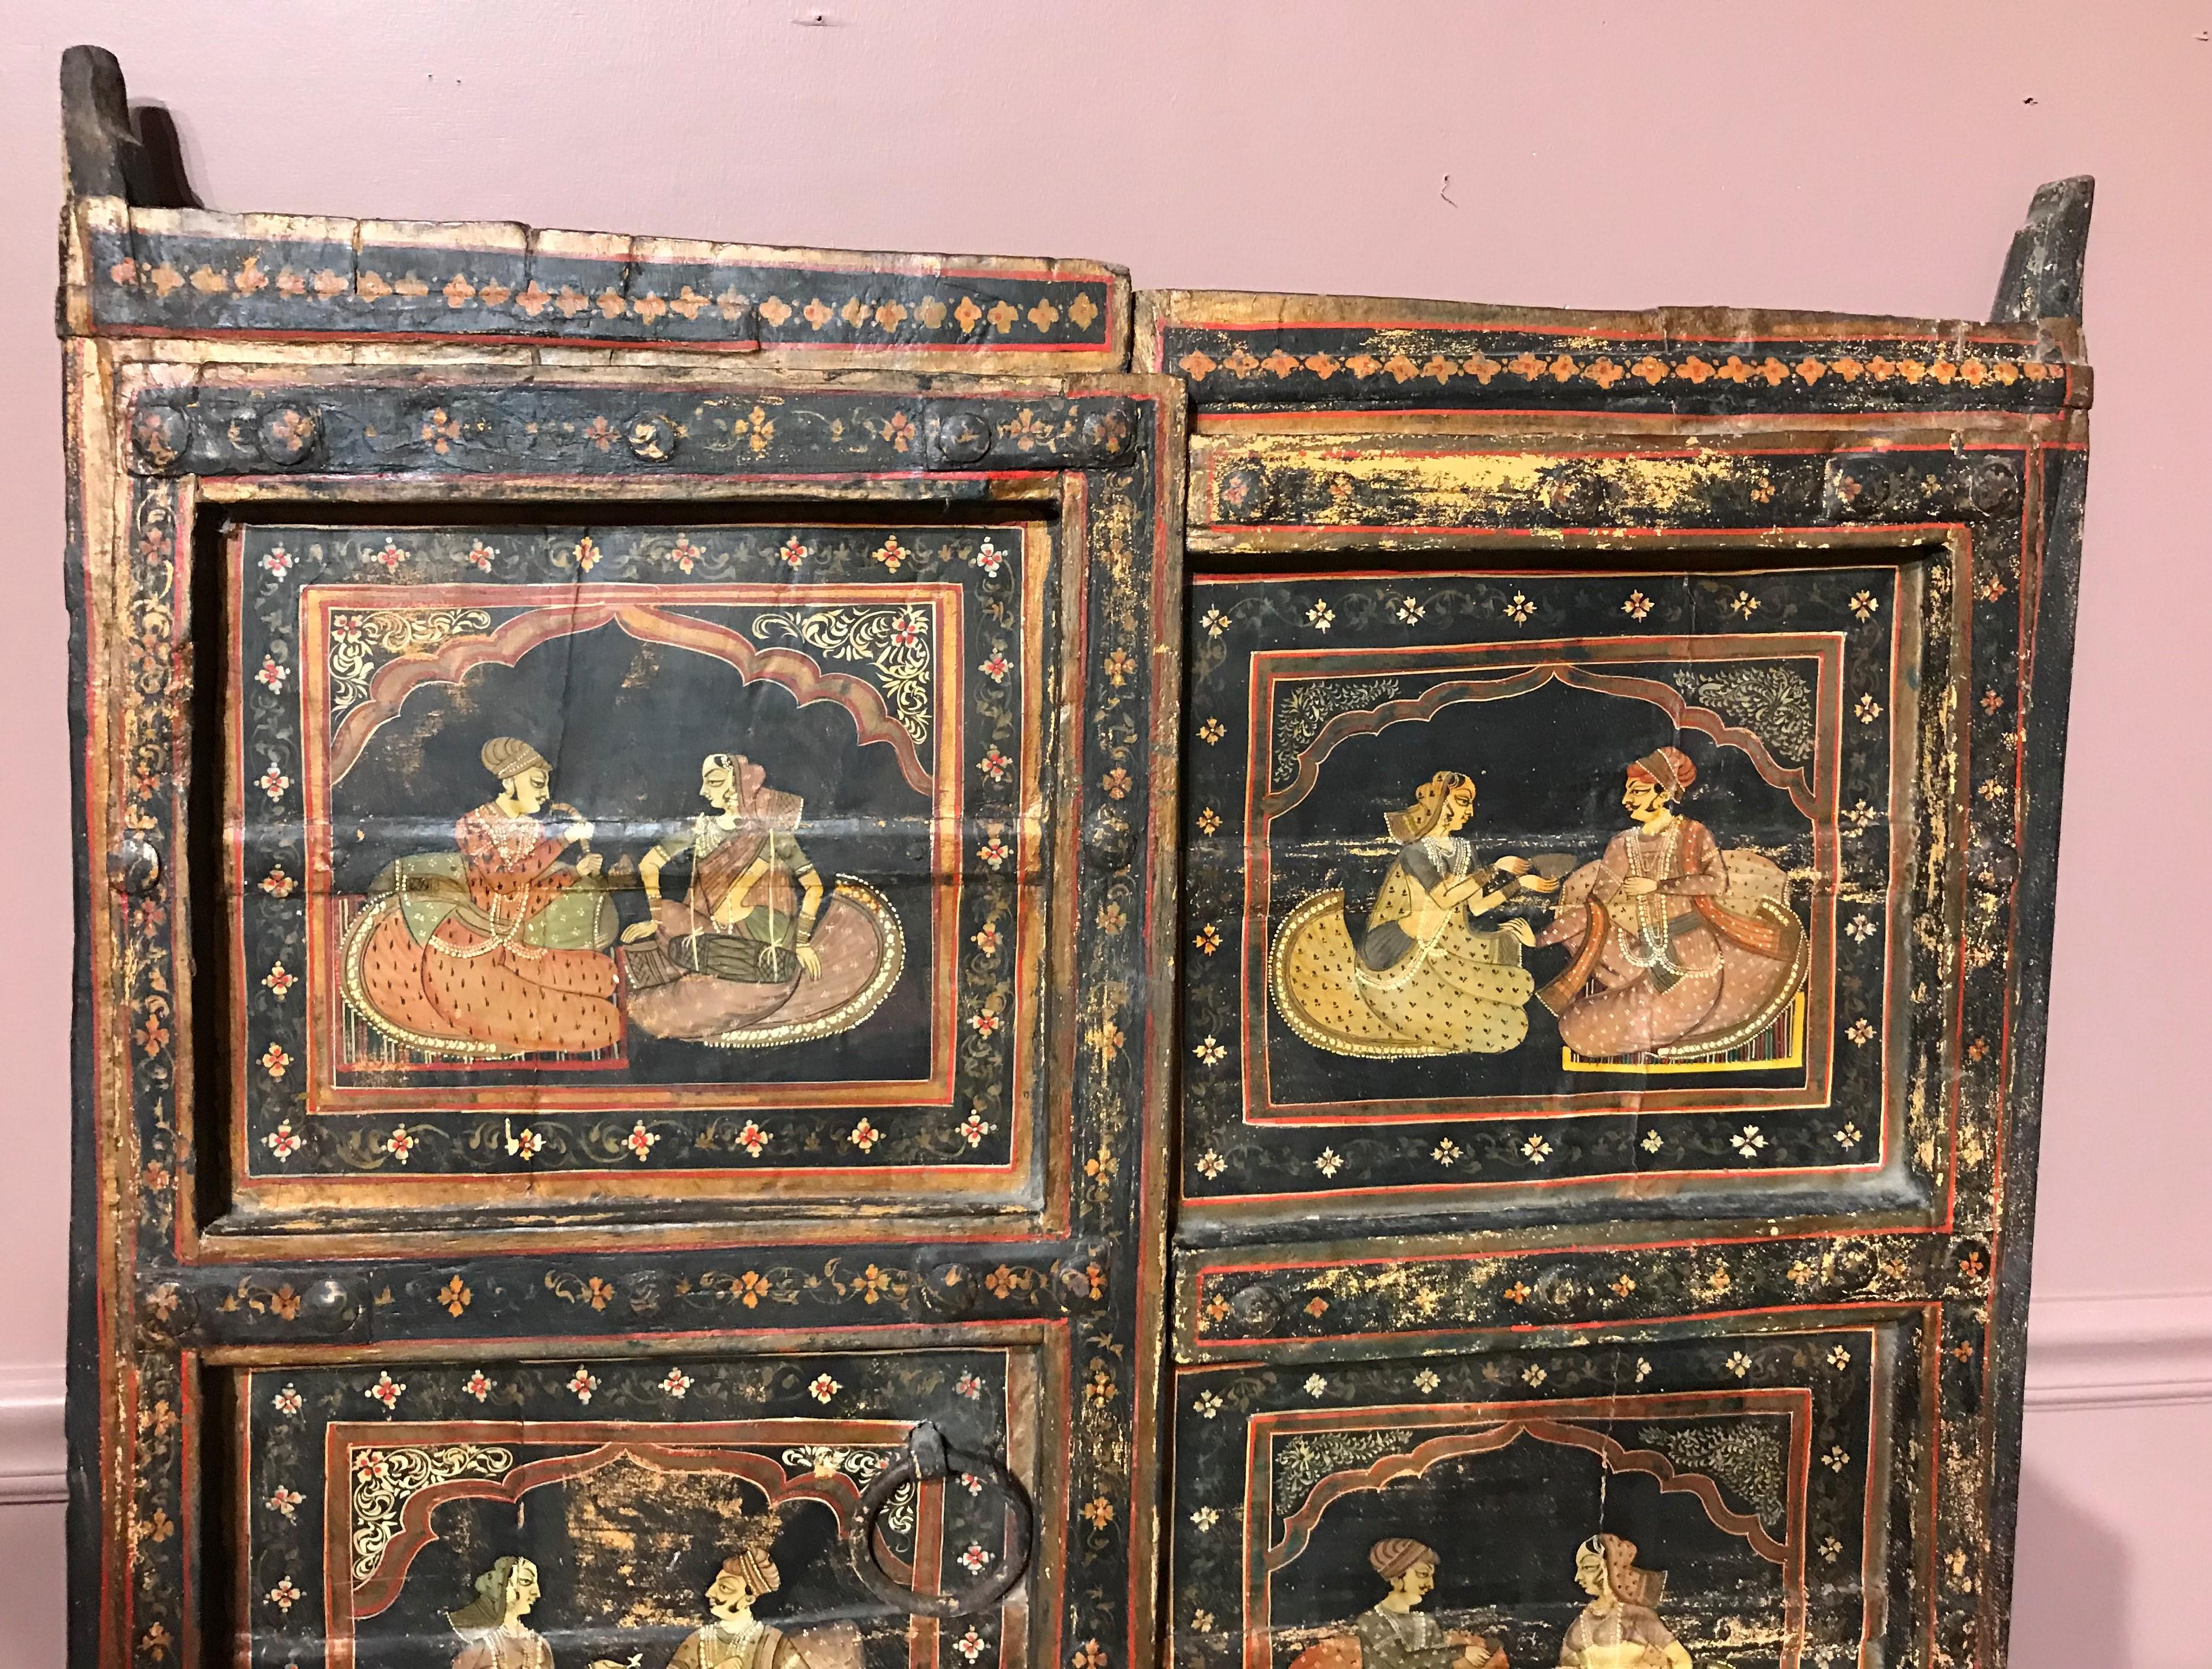 A pair of heavy wooden polychrome doors, depicting genre scenes of a man and woman on each panel, surrounded by foliate decoration, with ebonized backs, and five supports slats on each door. The doors have retained some of their original iron